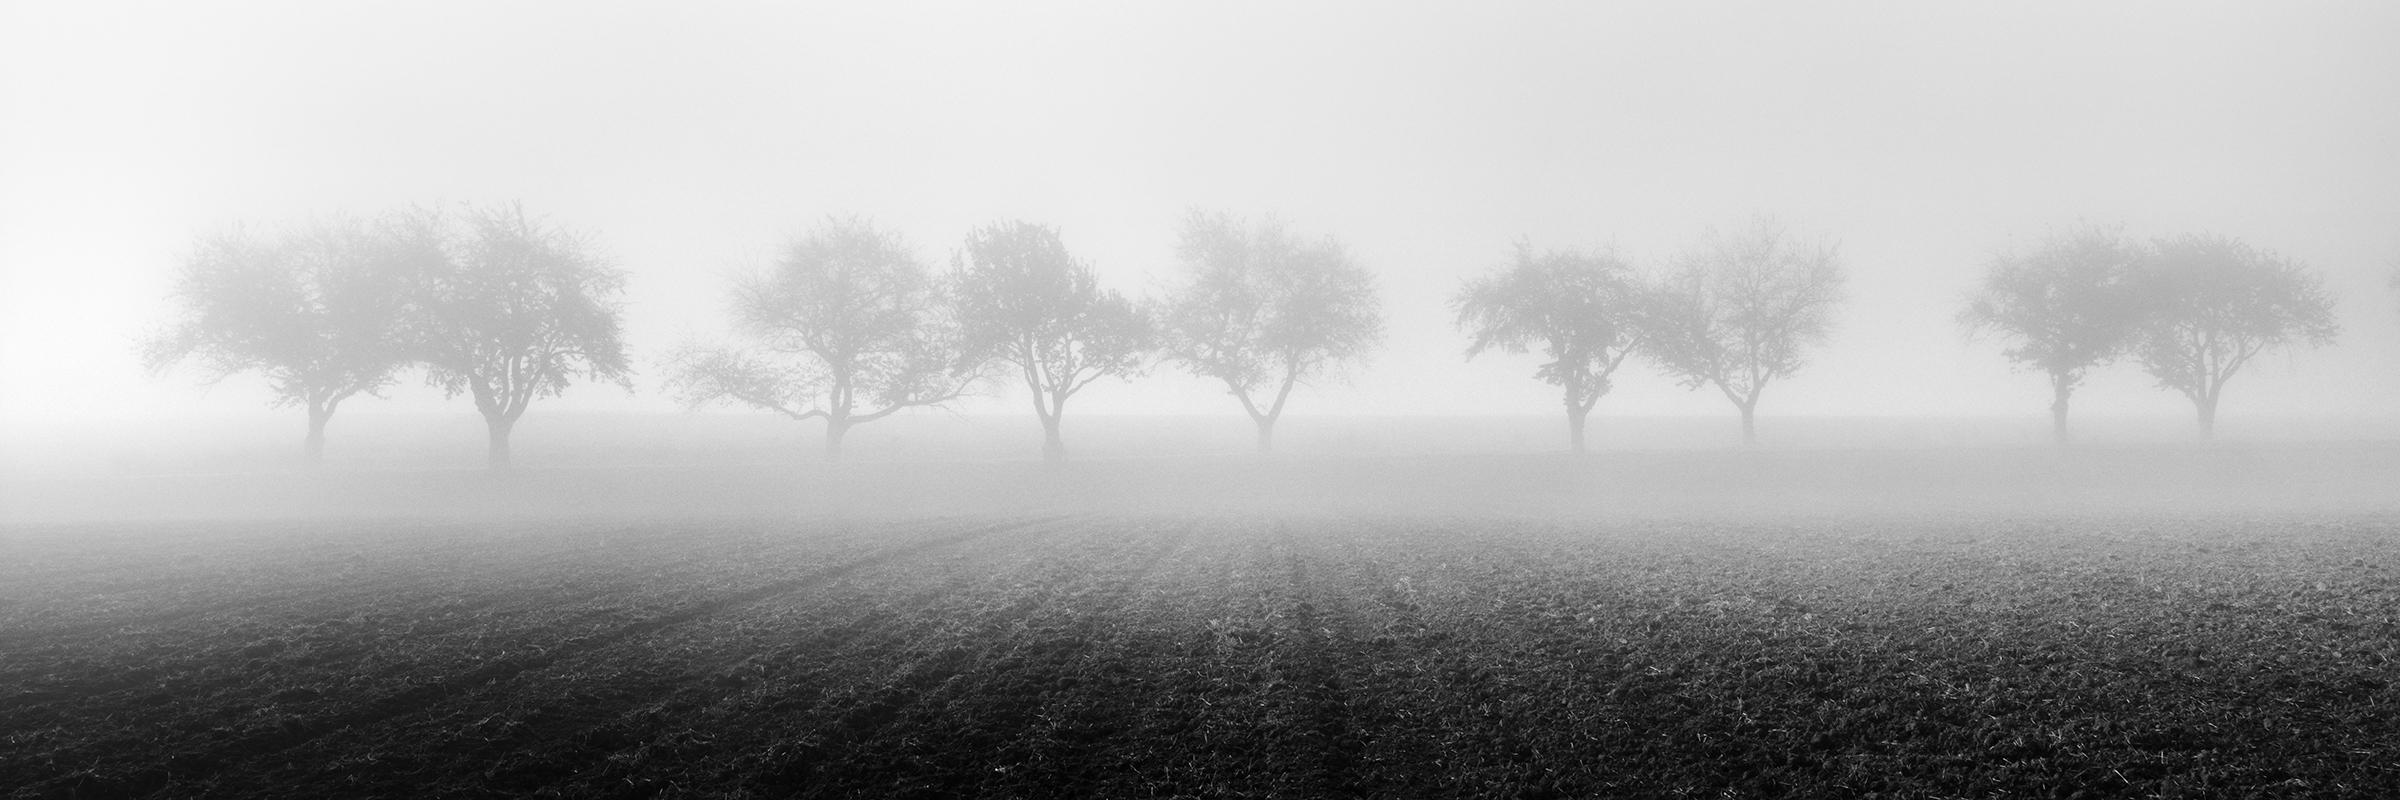 Gerald Berghammer Landscape Photograph - Foggy Morning, row of Cherry Trees, black and white photography, art landscape